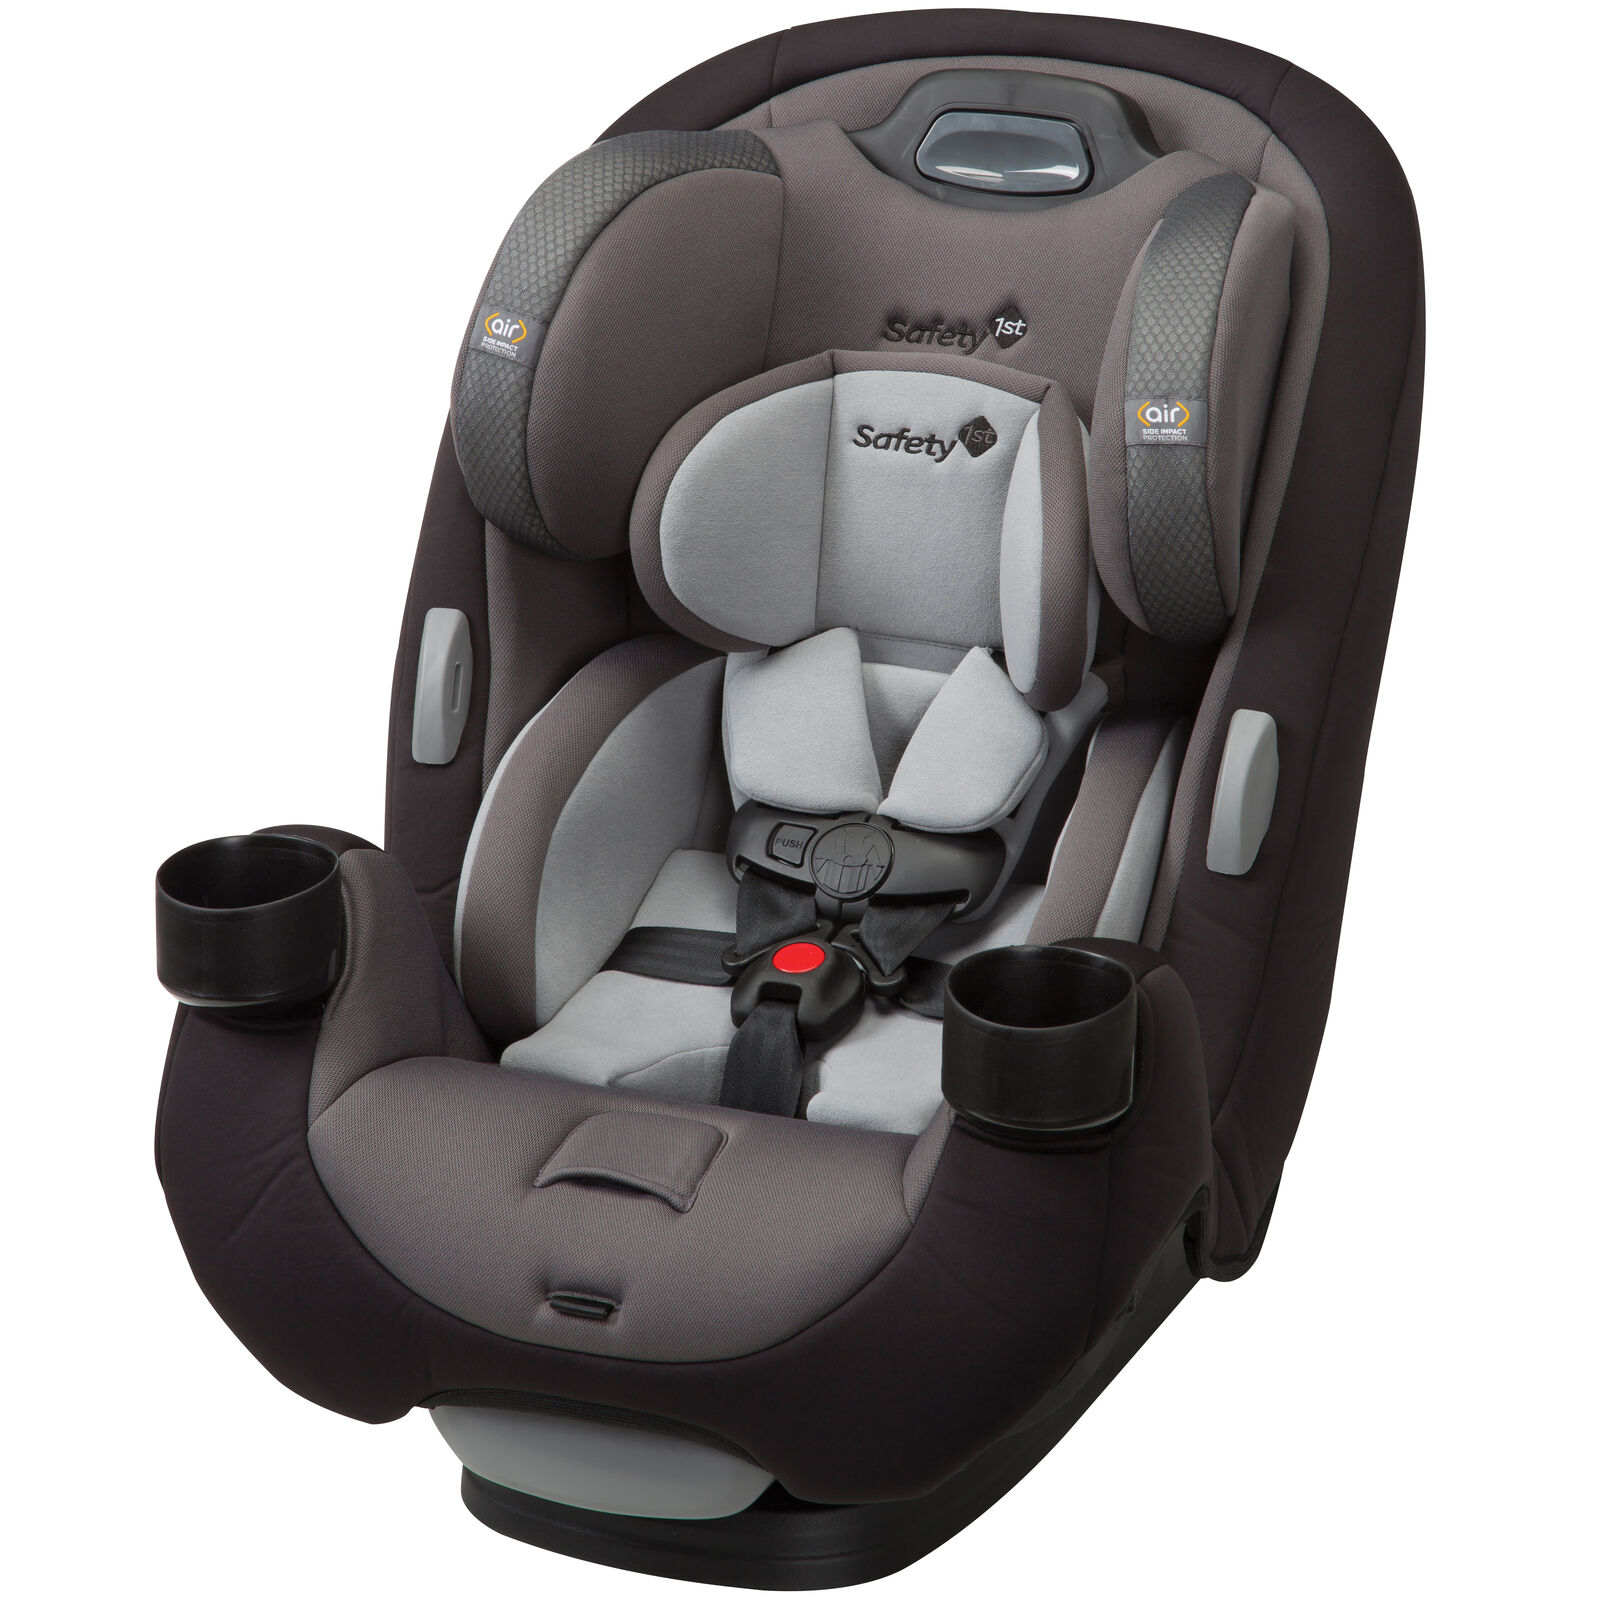 Safety 1st MultiFit EX Air All-in-One Car Seat, Rear and Forward Facing